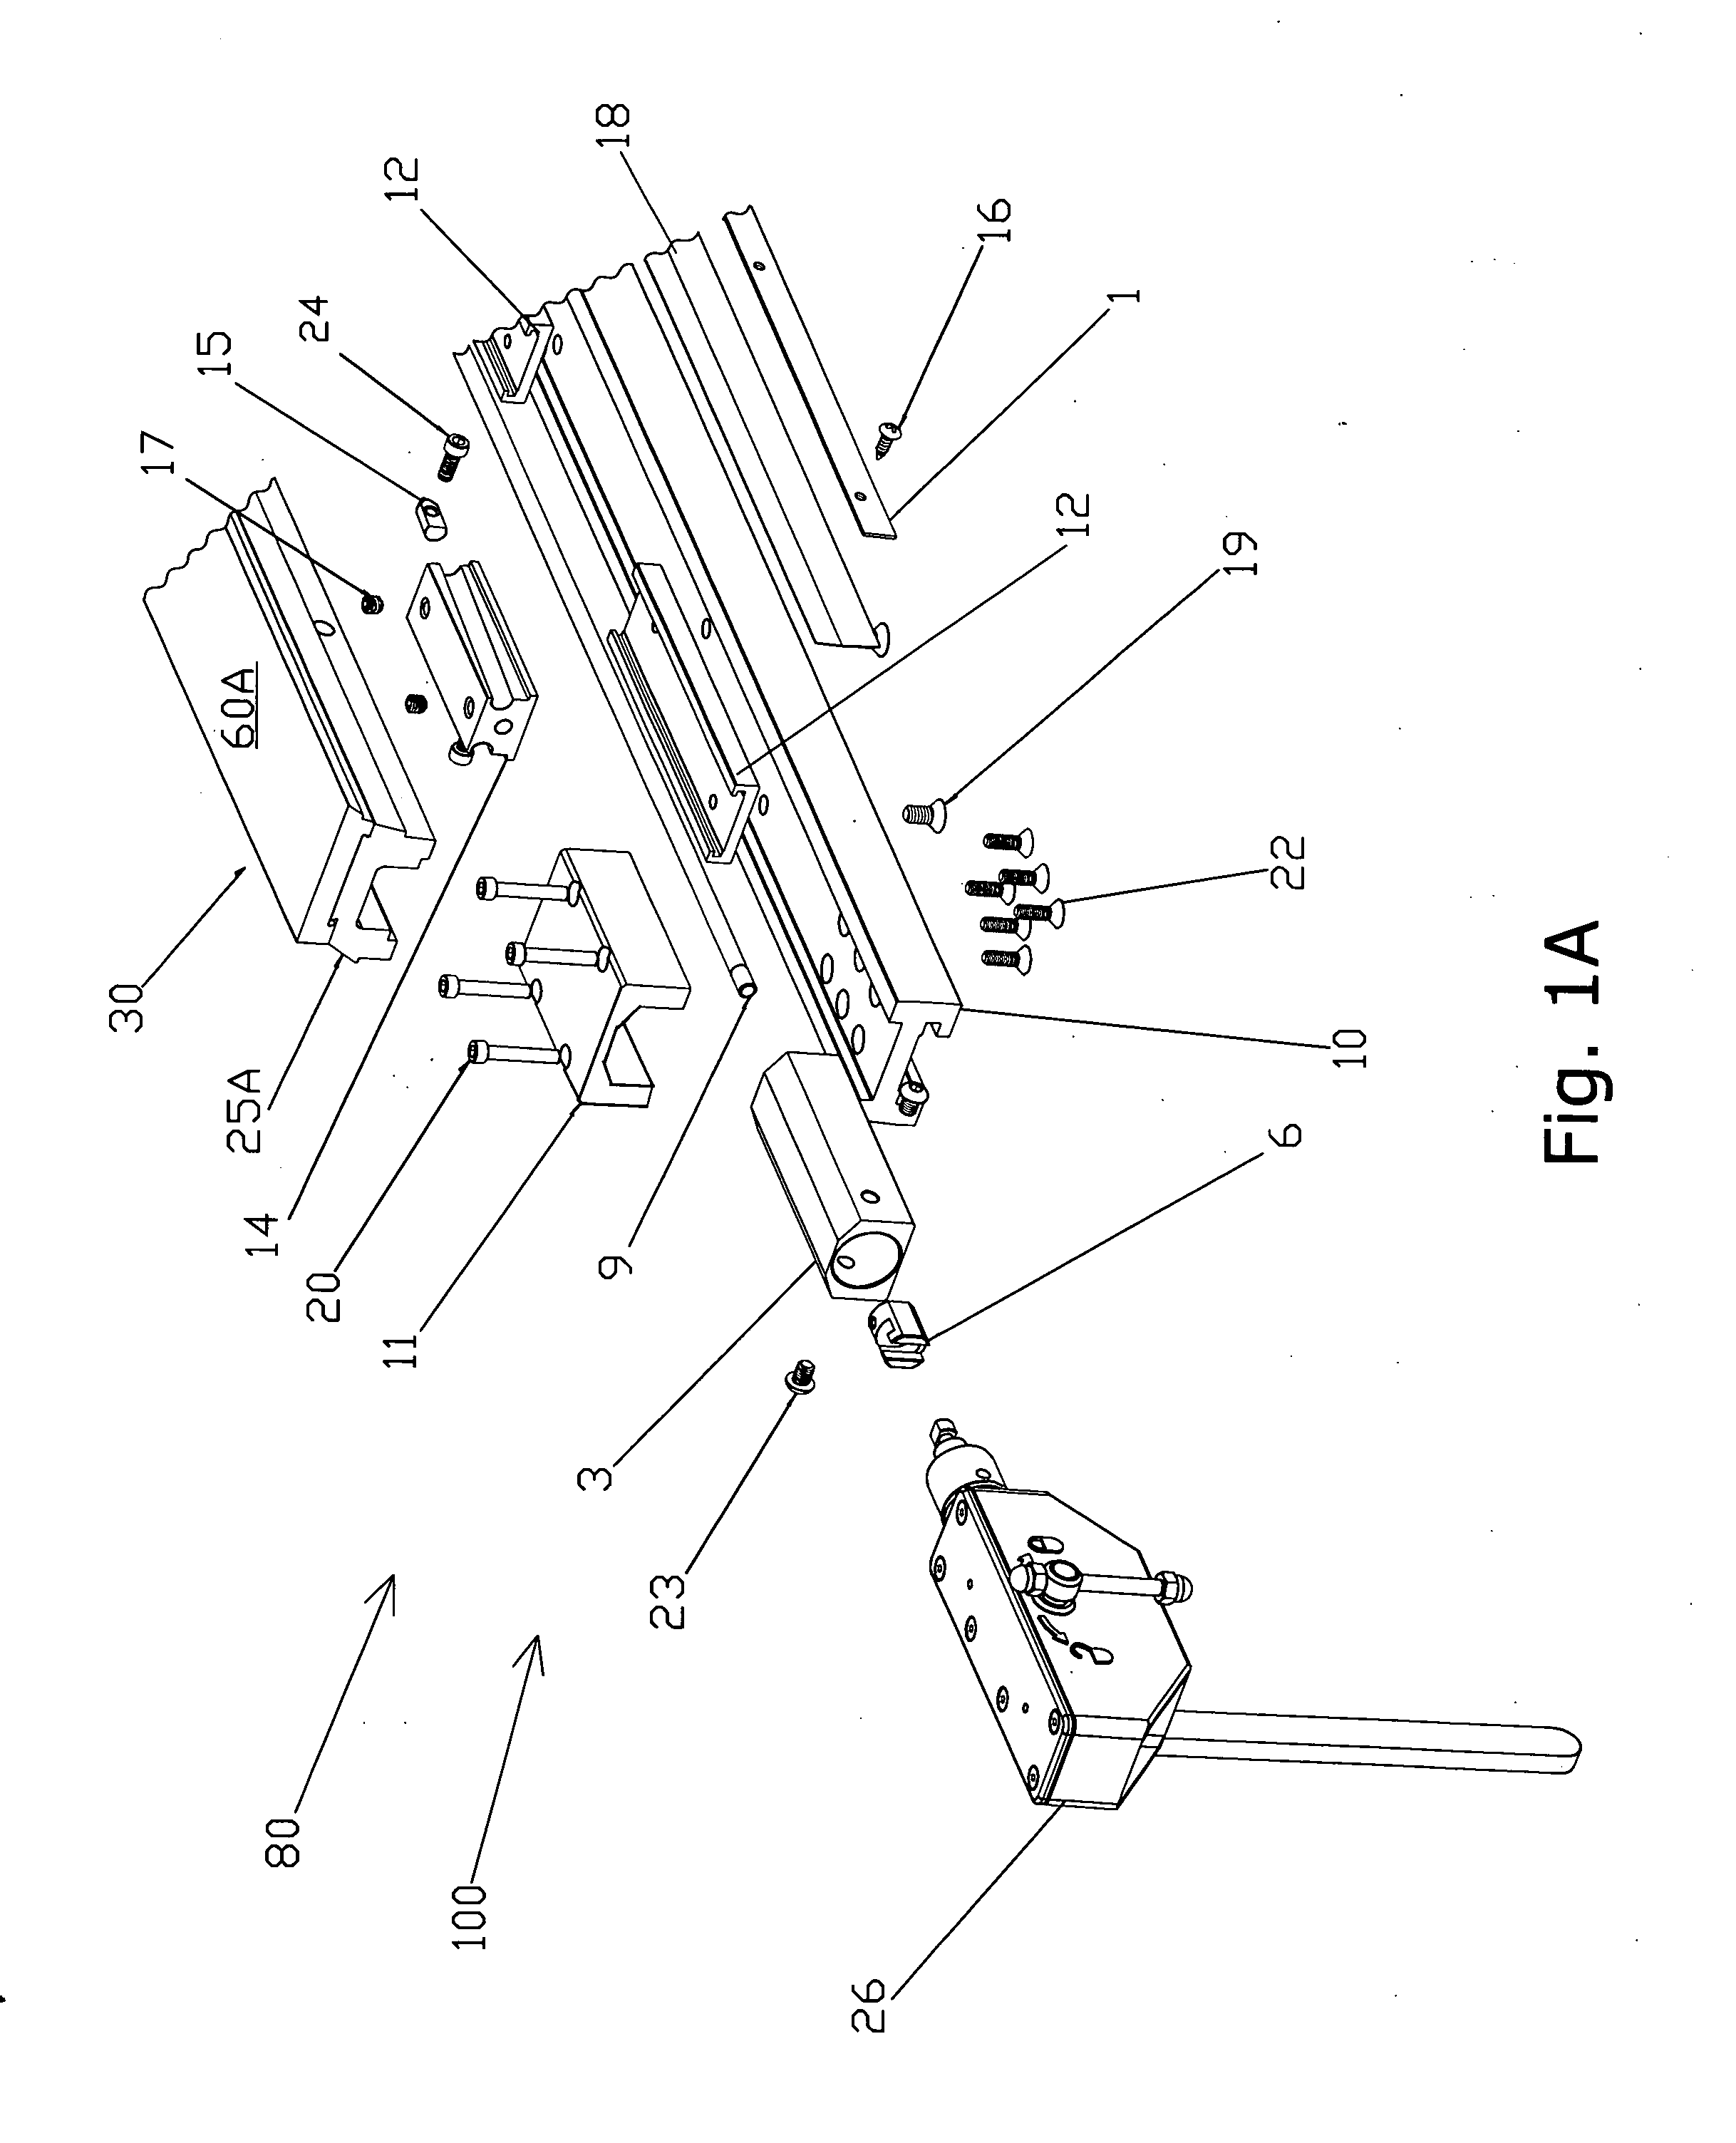 Angle and height control mechanisms in fourdrinier forming processes and machines